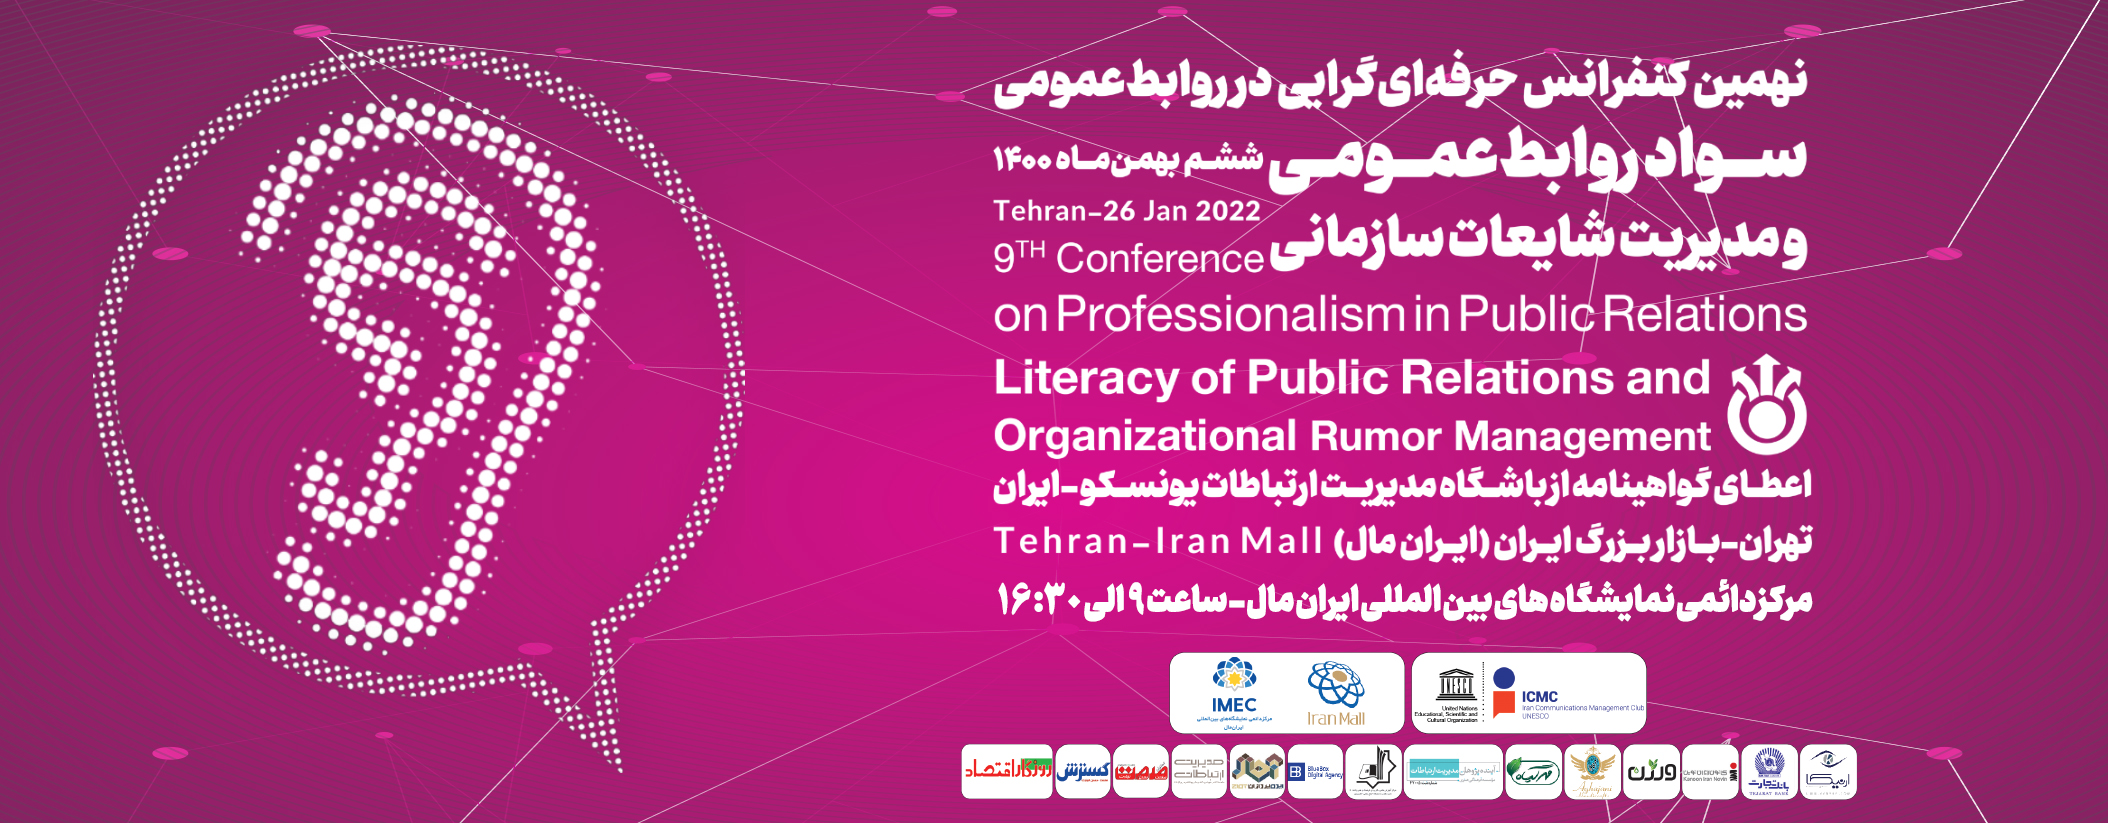 Iran Mall Exhibition Center hosts the 9th Conference on Professionalism and Public Relations